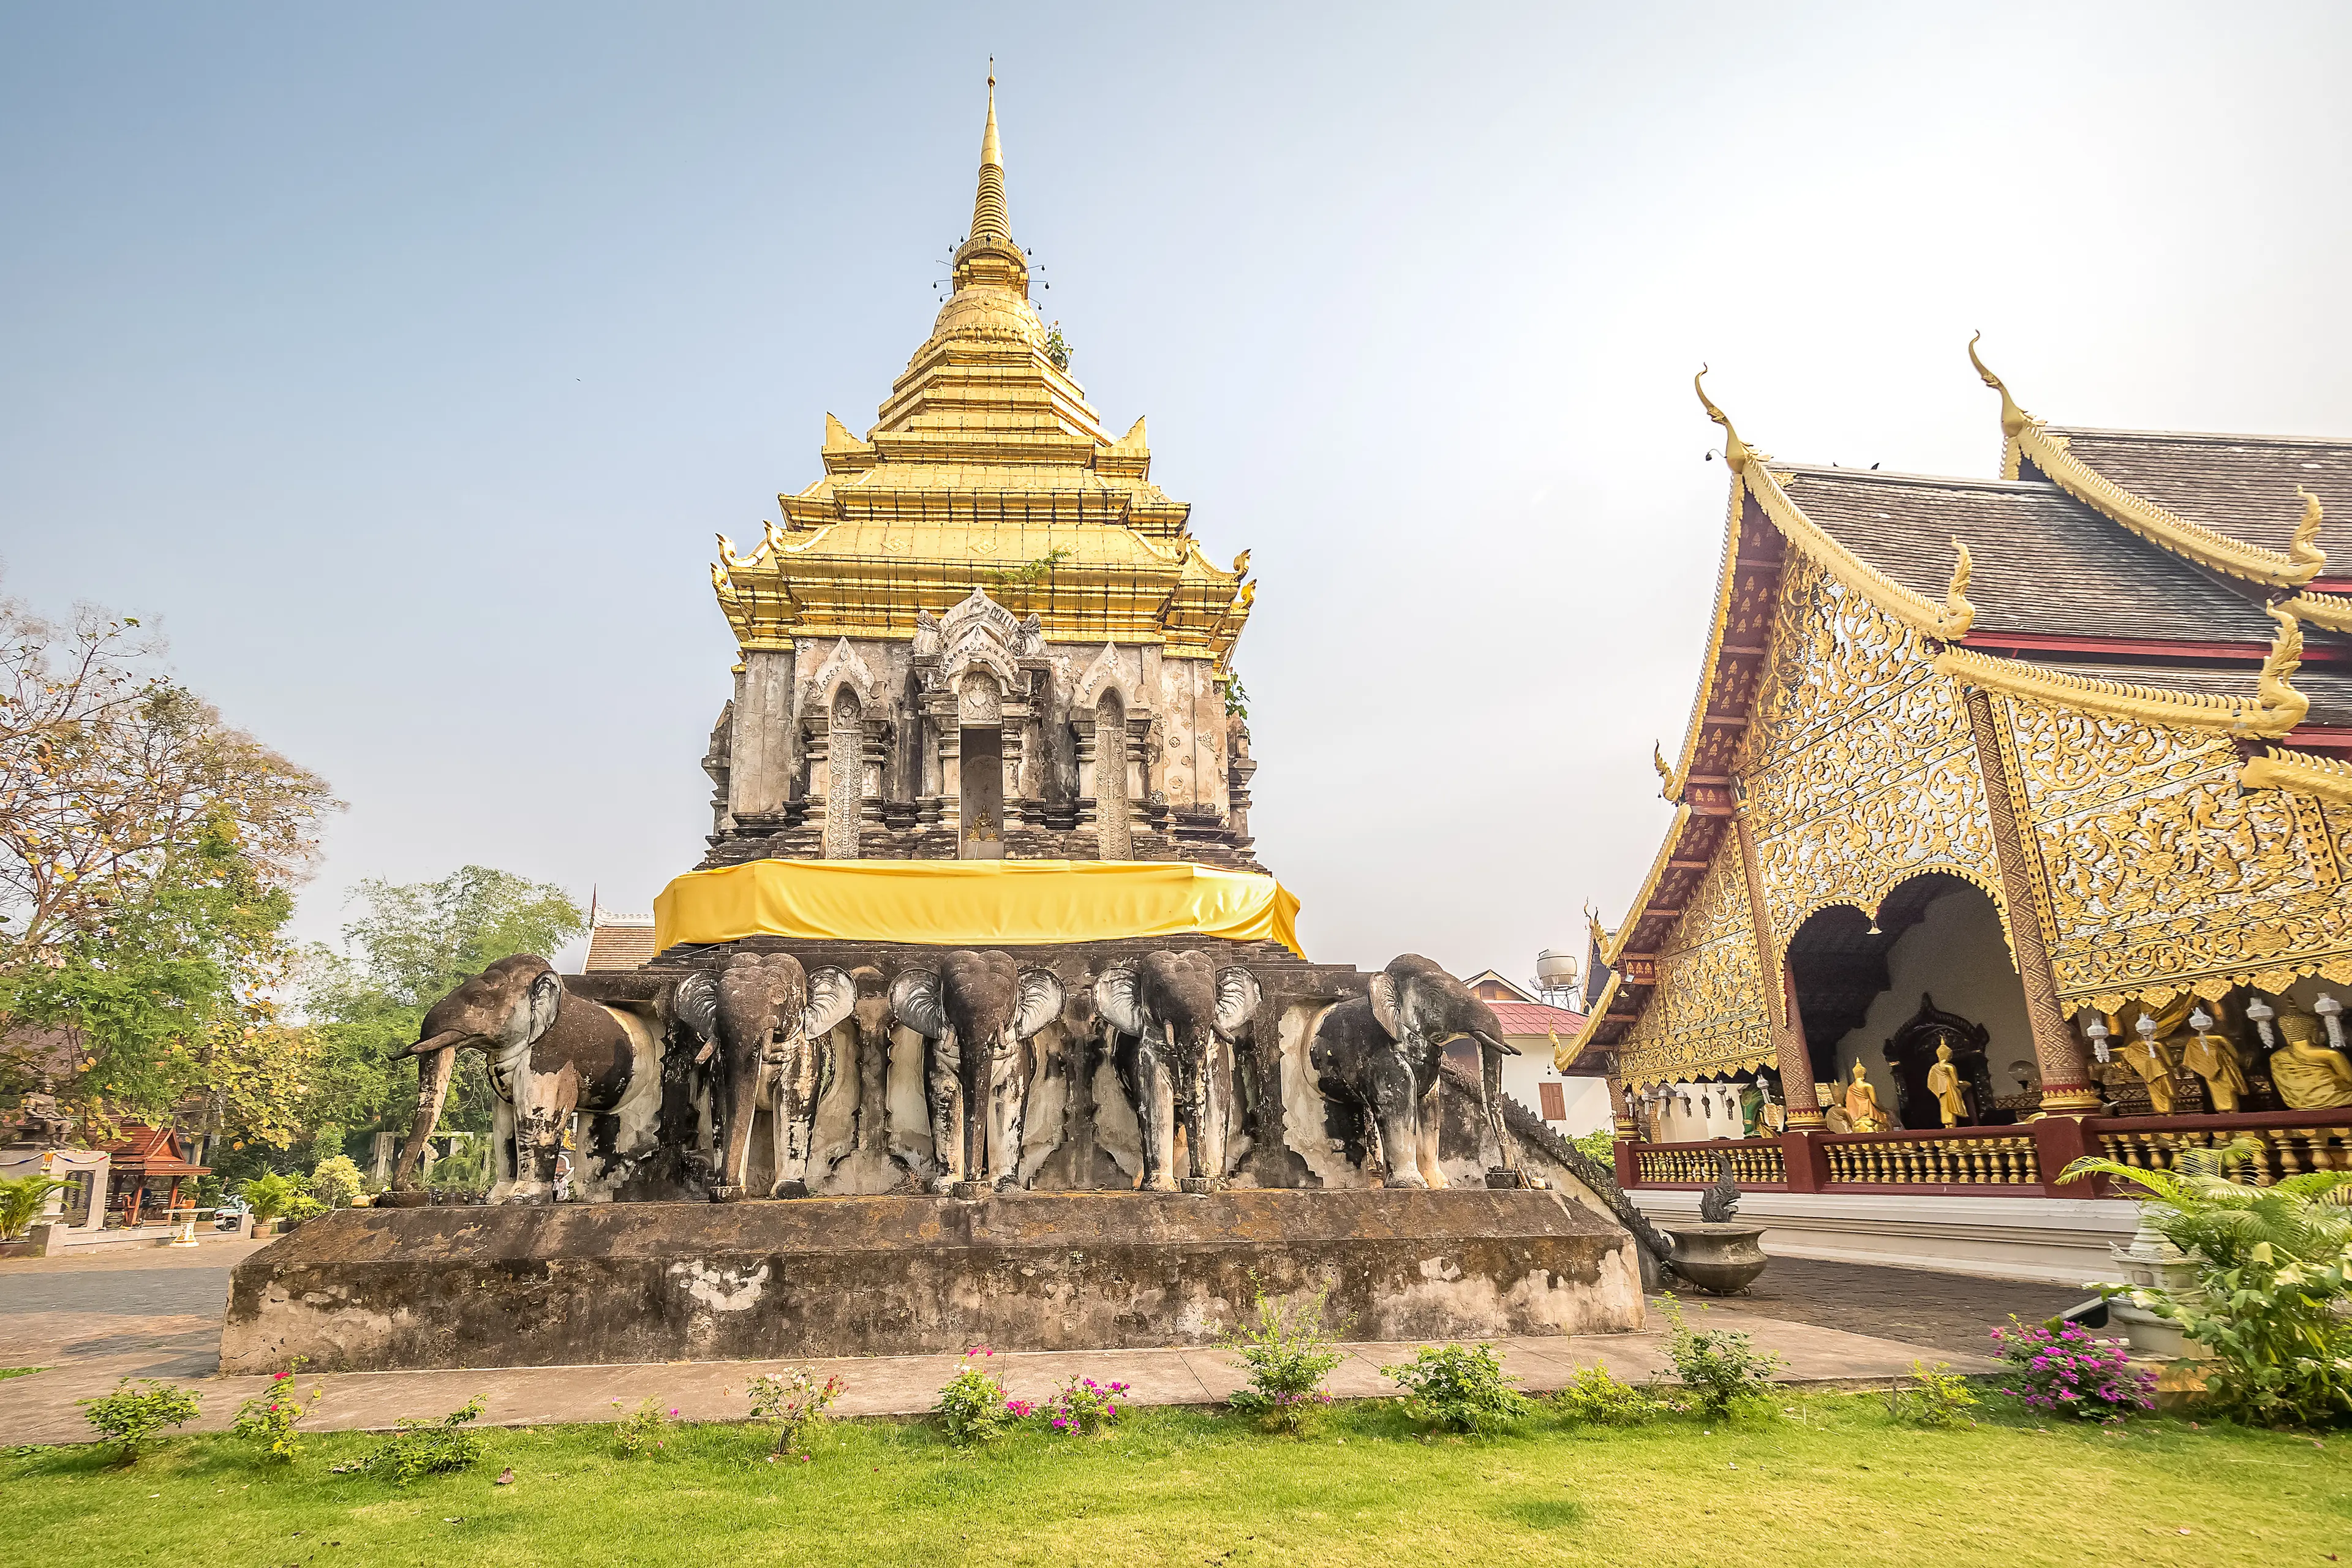 4-Day Family Adventure & Relaxation Itinerary in Chiang Mai